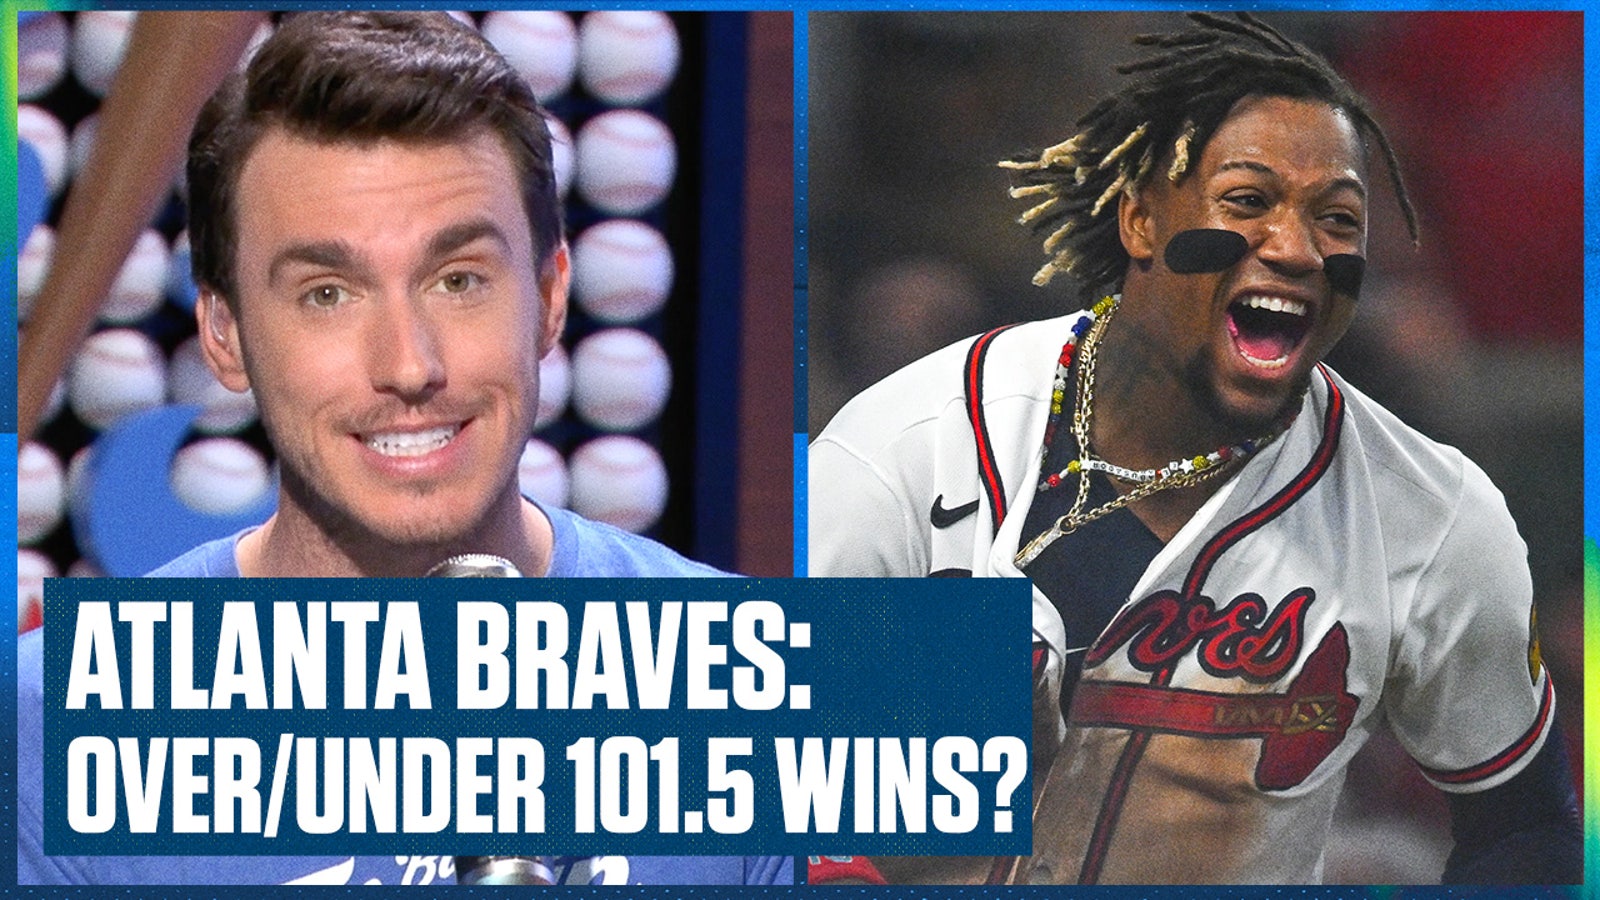 Will the Braves win over/under 101.5 games for the 2024 season?